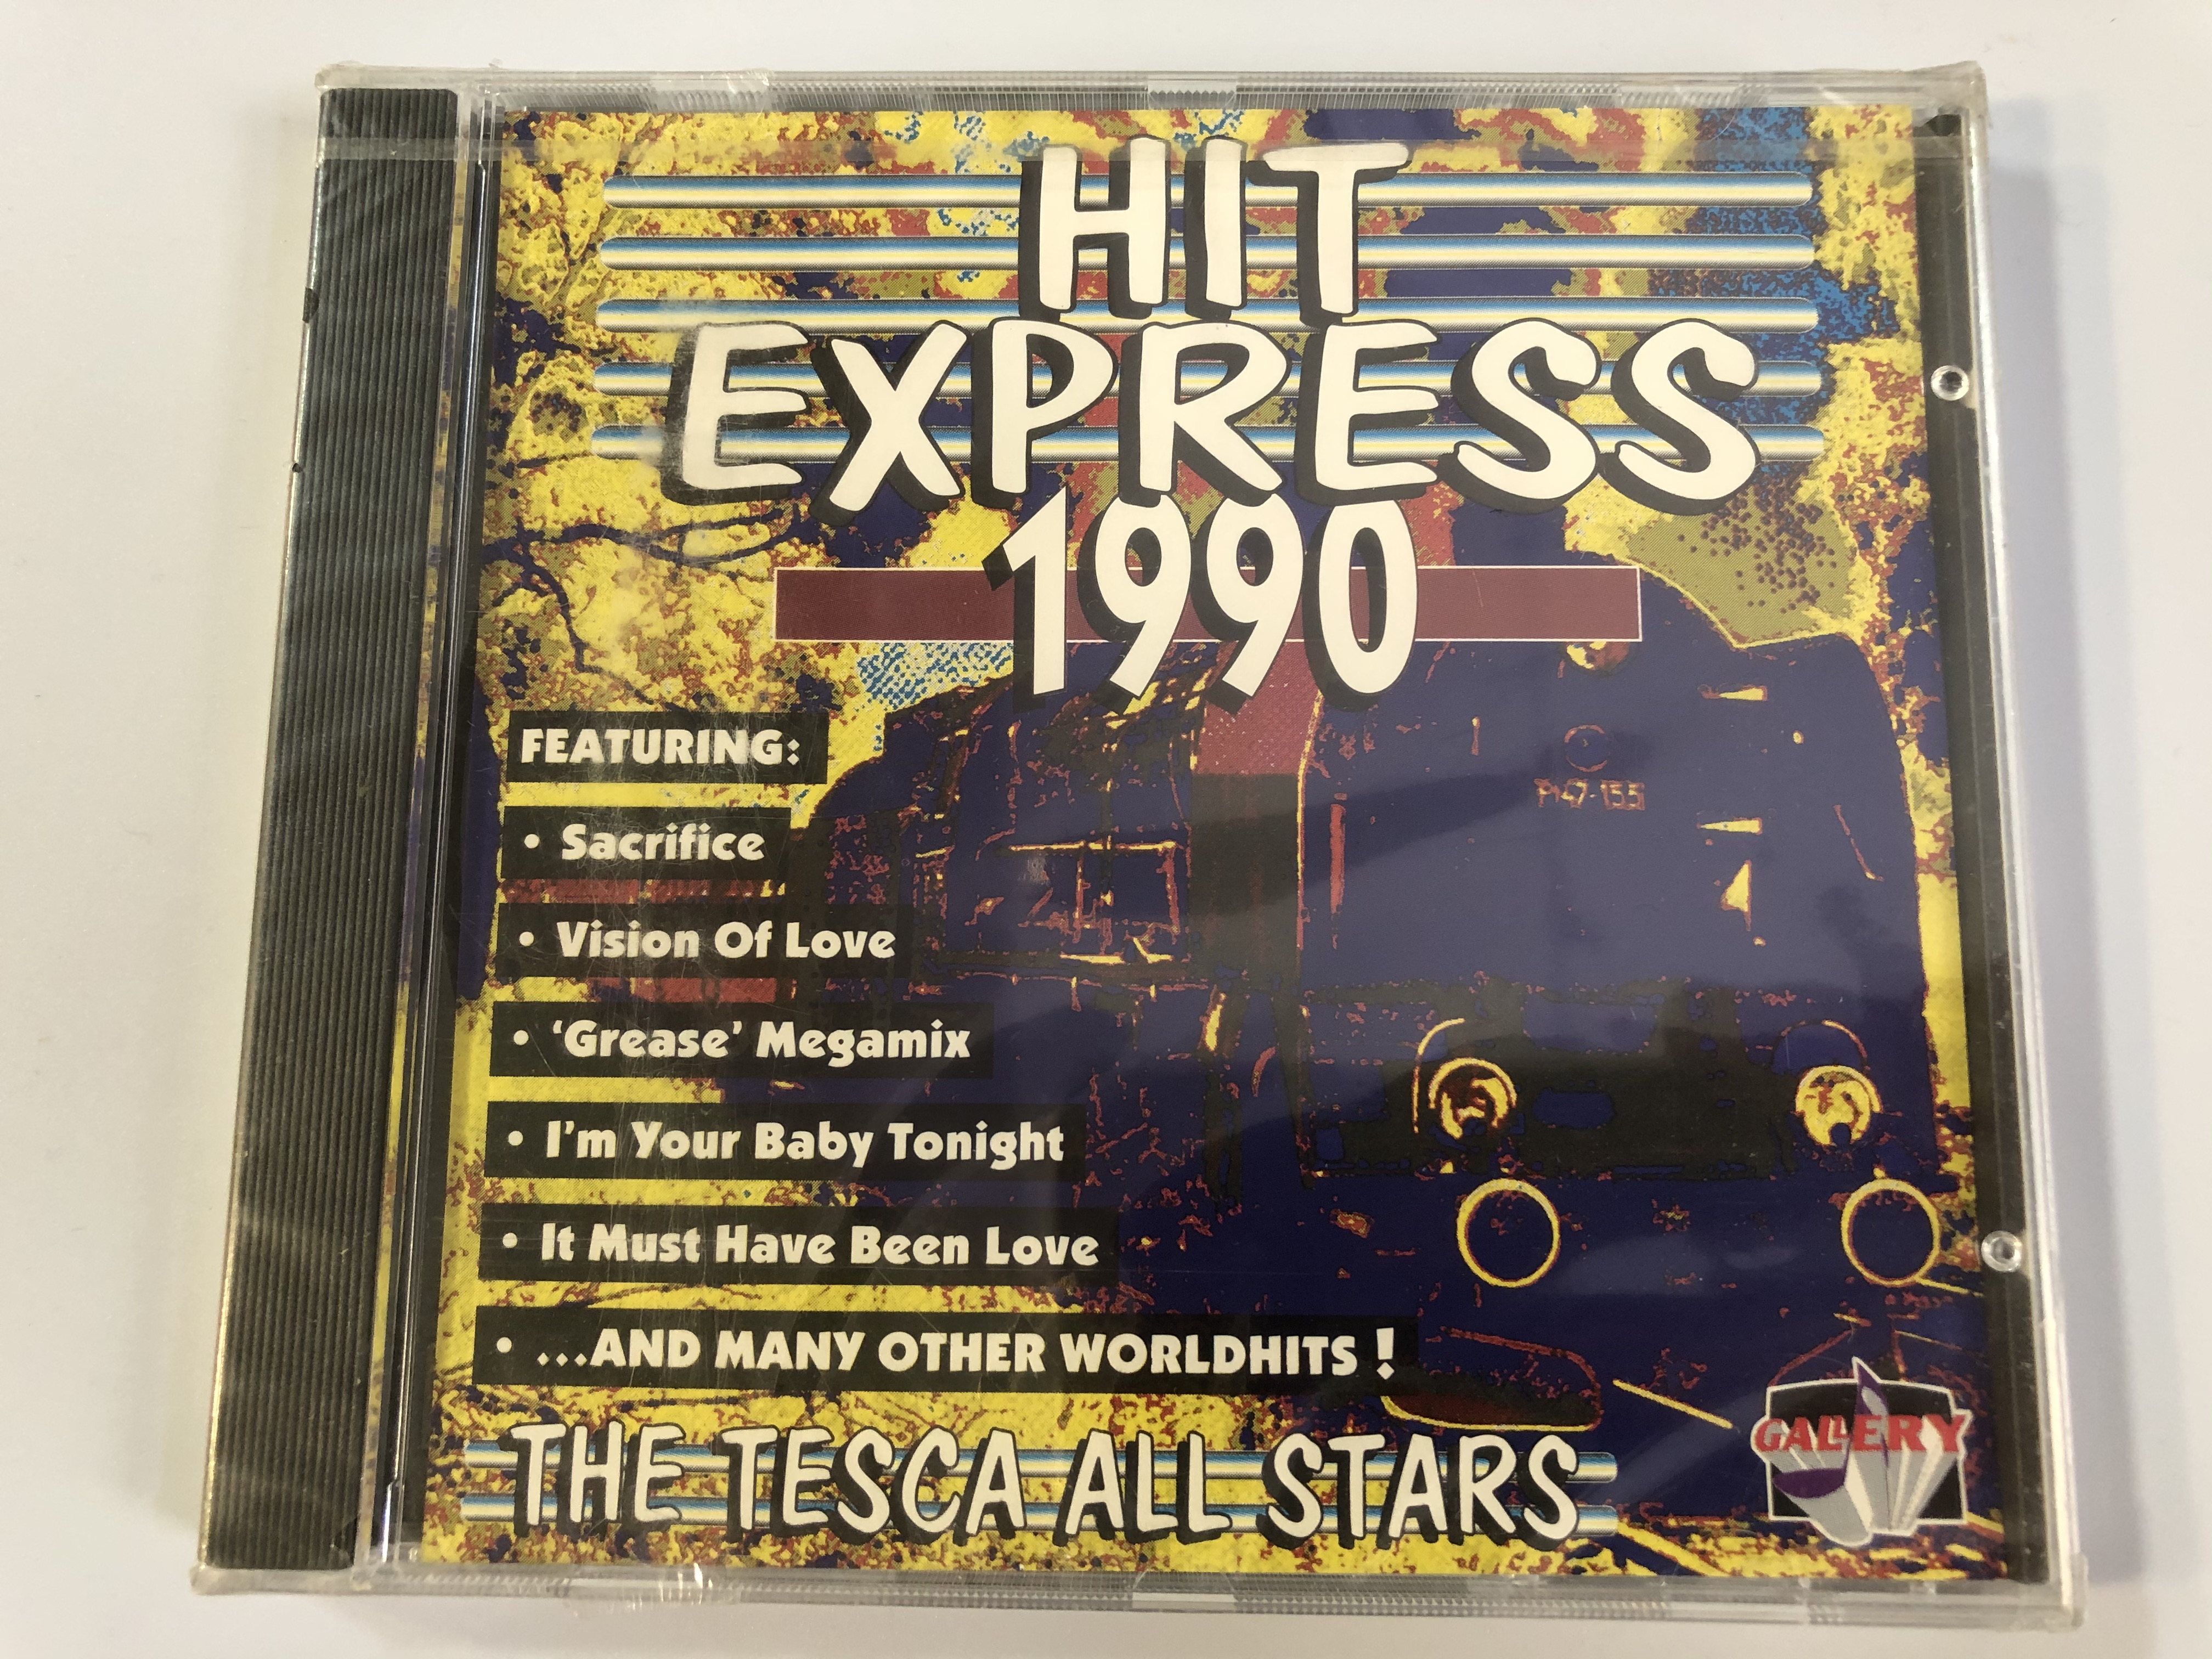 hit-express-1990-featuring-sacrifice-vision-of-love-grease-megamix-i-m-your-baby-tonight-it-must-have-been-love-and-many-other-worldhits-the-tesca-all-stars-gallery-audio-cd-cd-351-1-.jpg